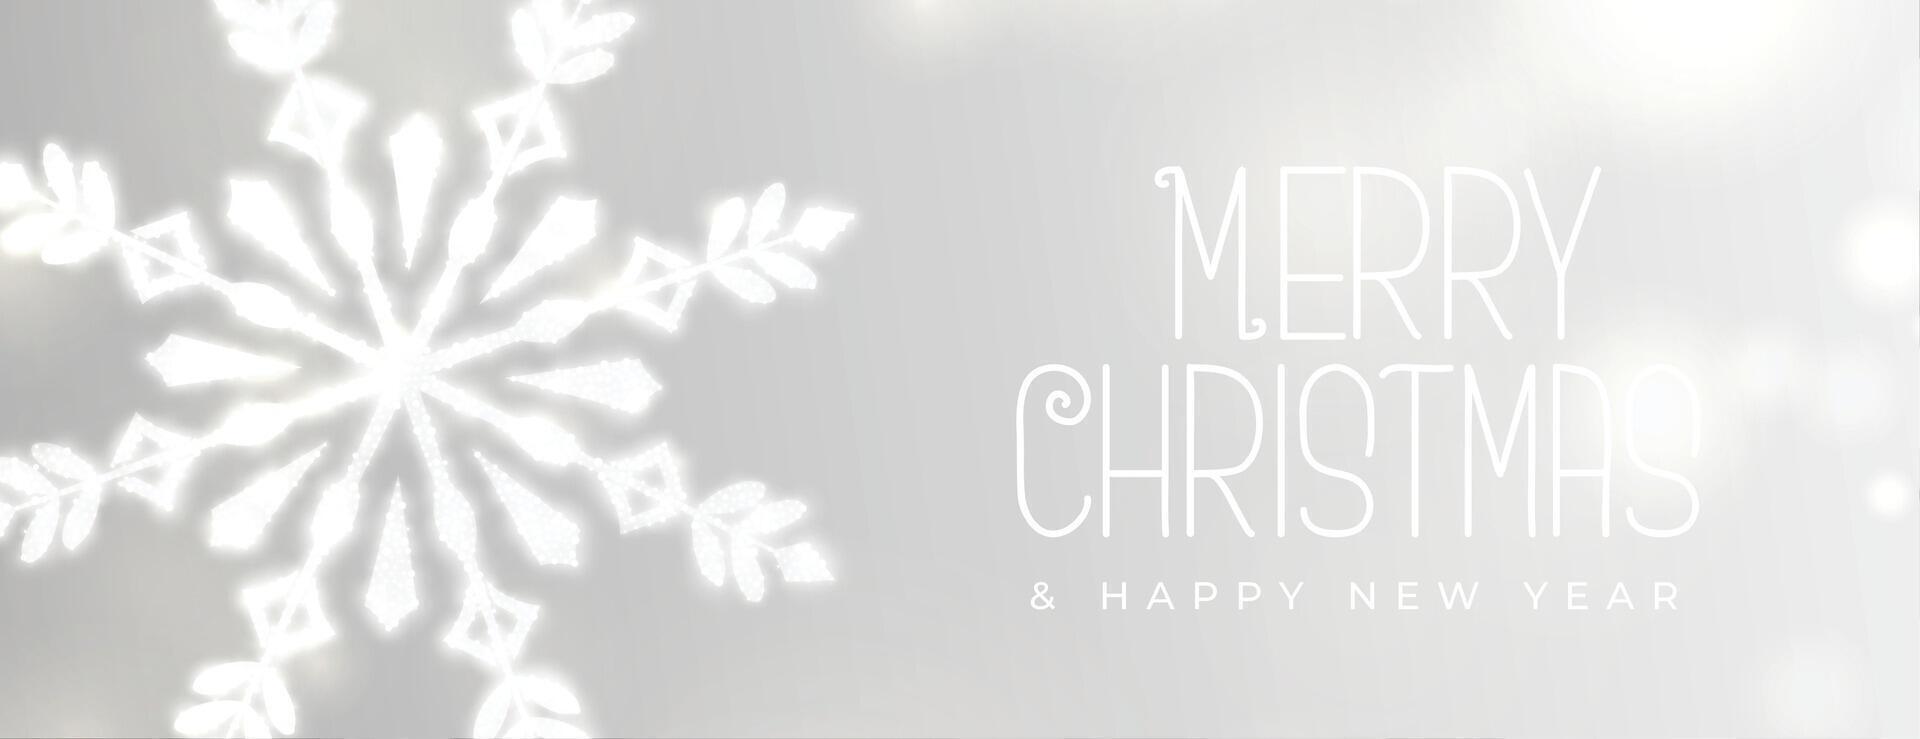 glowing snowflakes merry christmas banner design vector